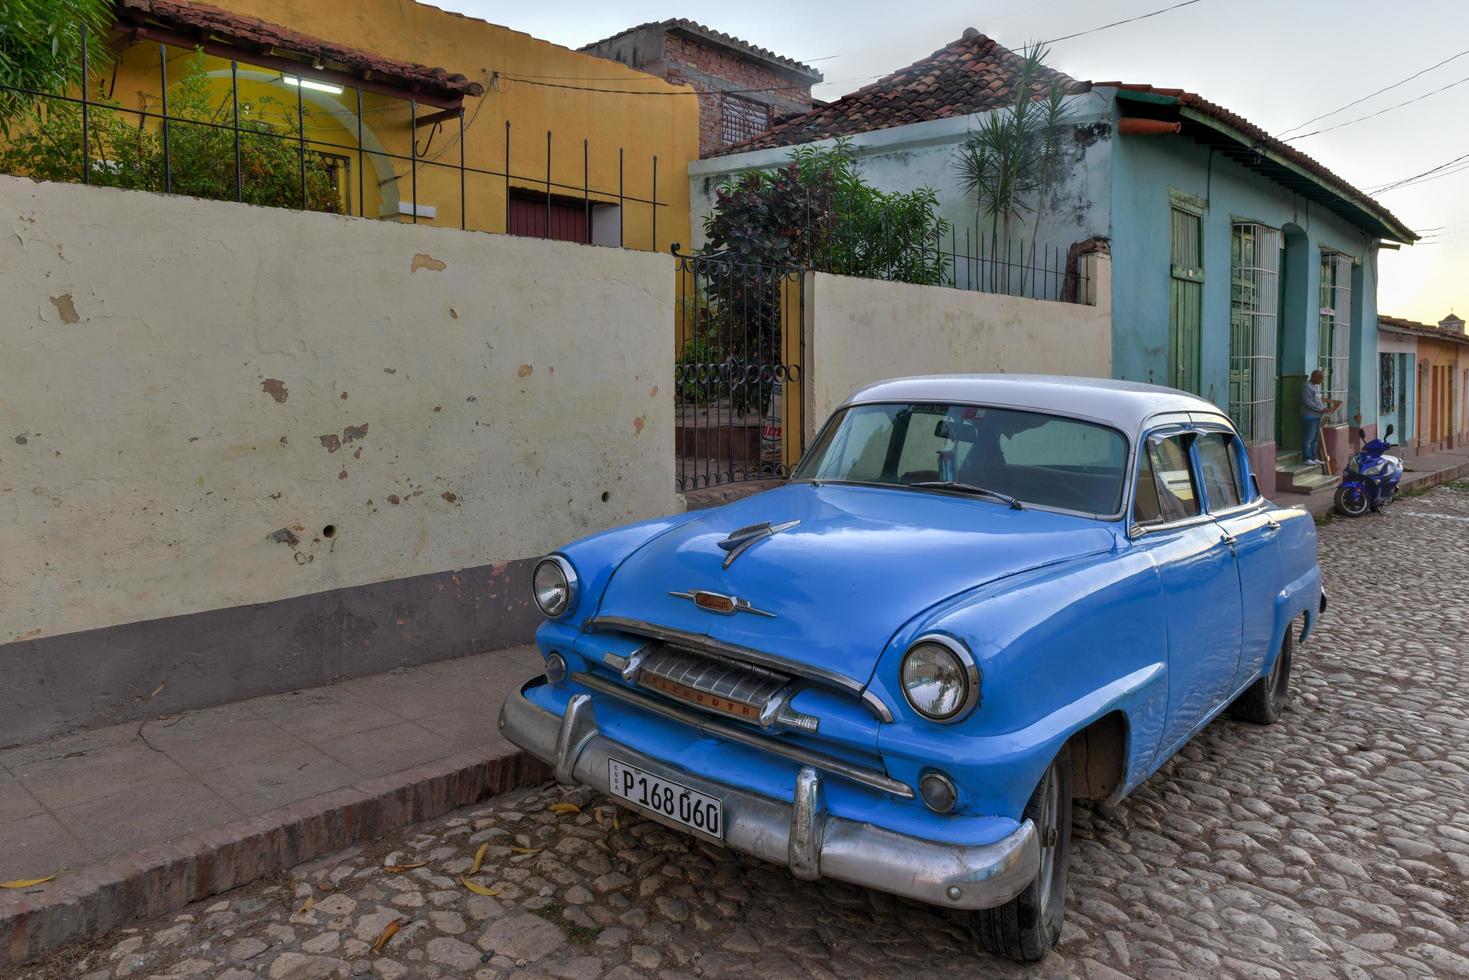 Trinidad, Cuba - Jan 13, 2017 -  Classic American Plymouth parked along the colorful traditional houses in the colonial town of Trinidad in Cuba, a UNESCO World Heritage site. photo